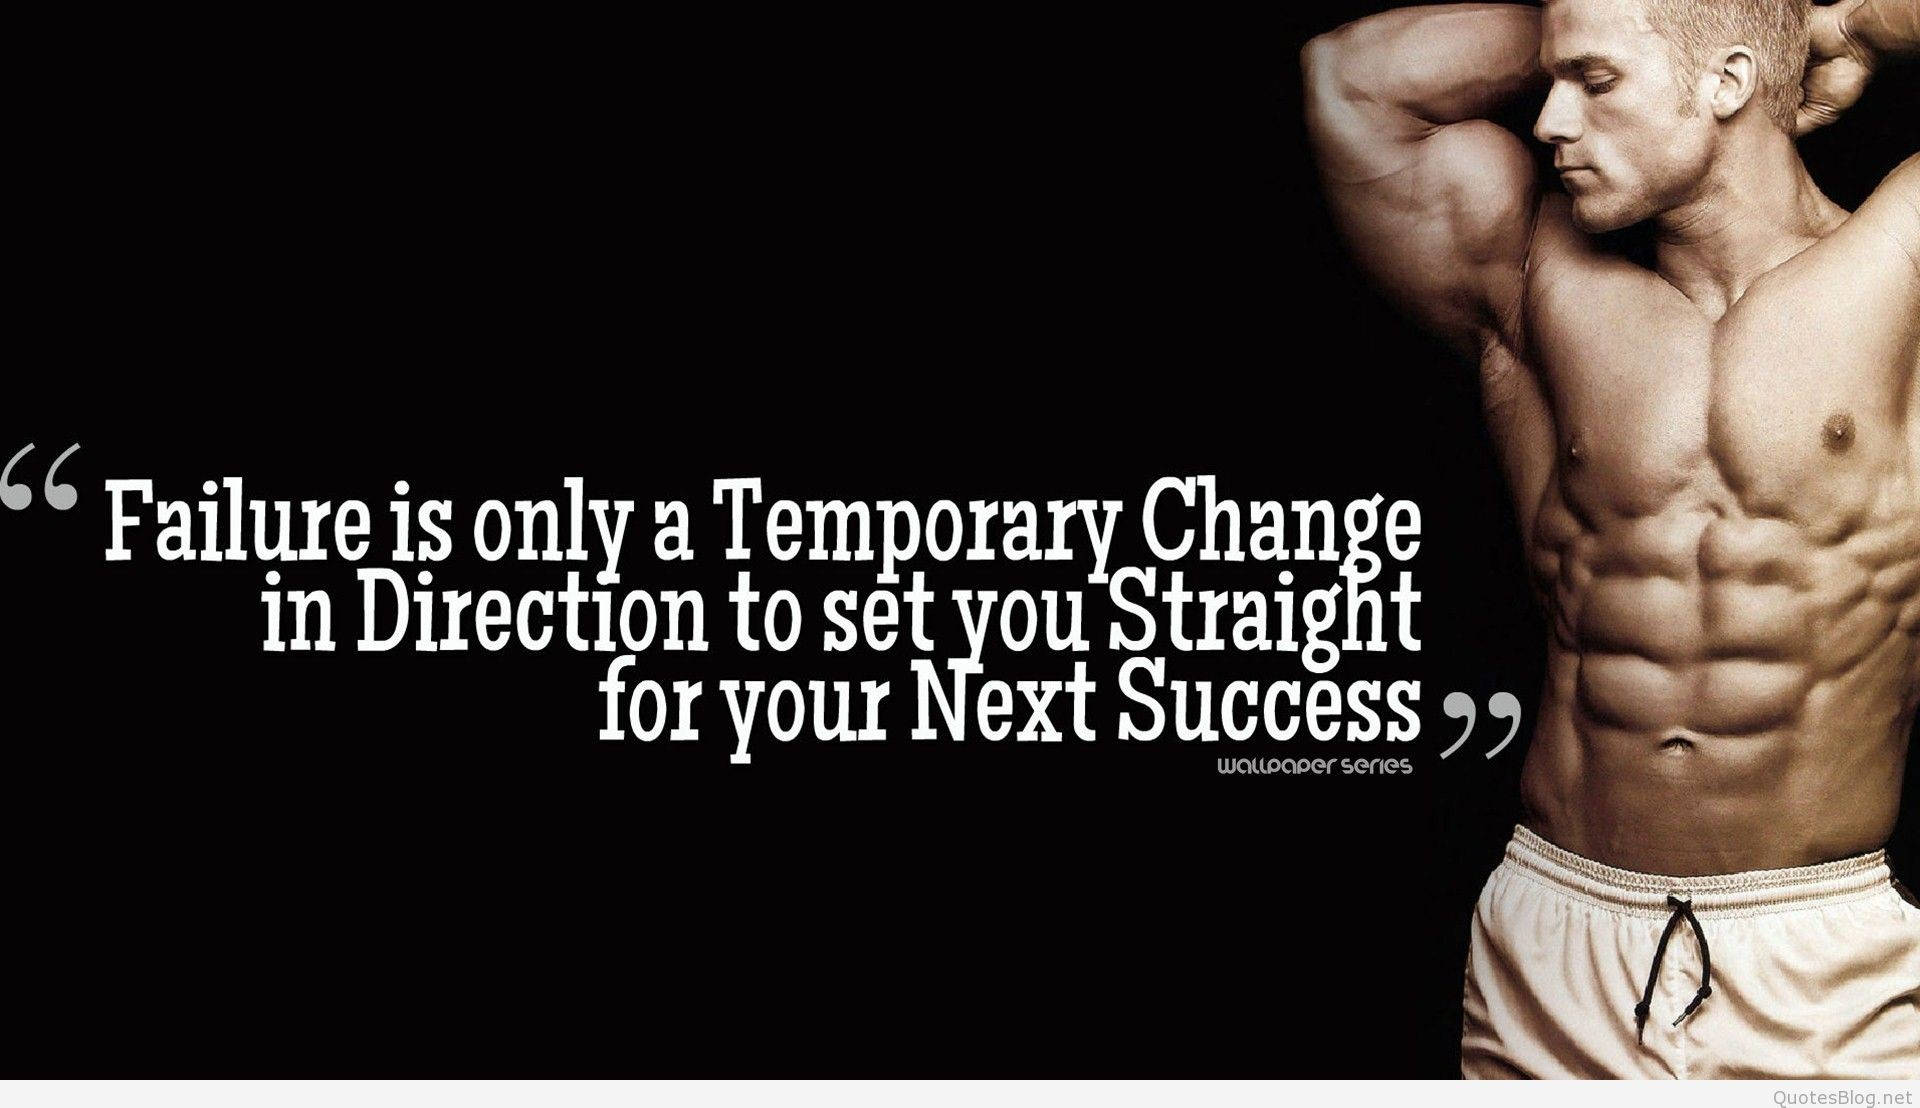 Success Gym Quote Background